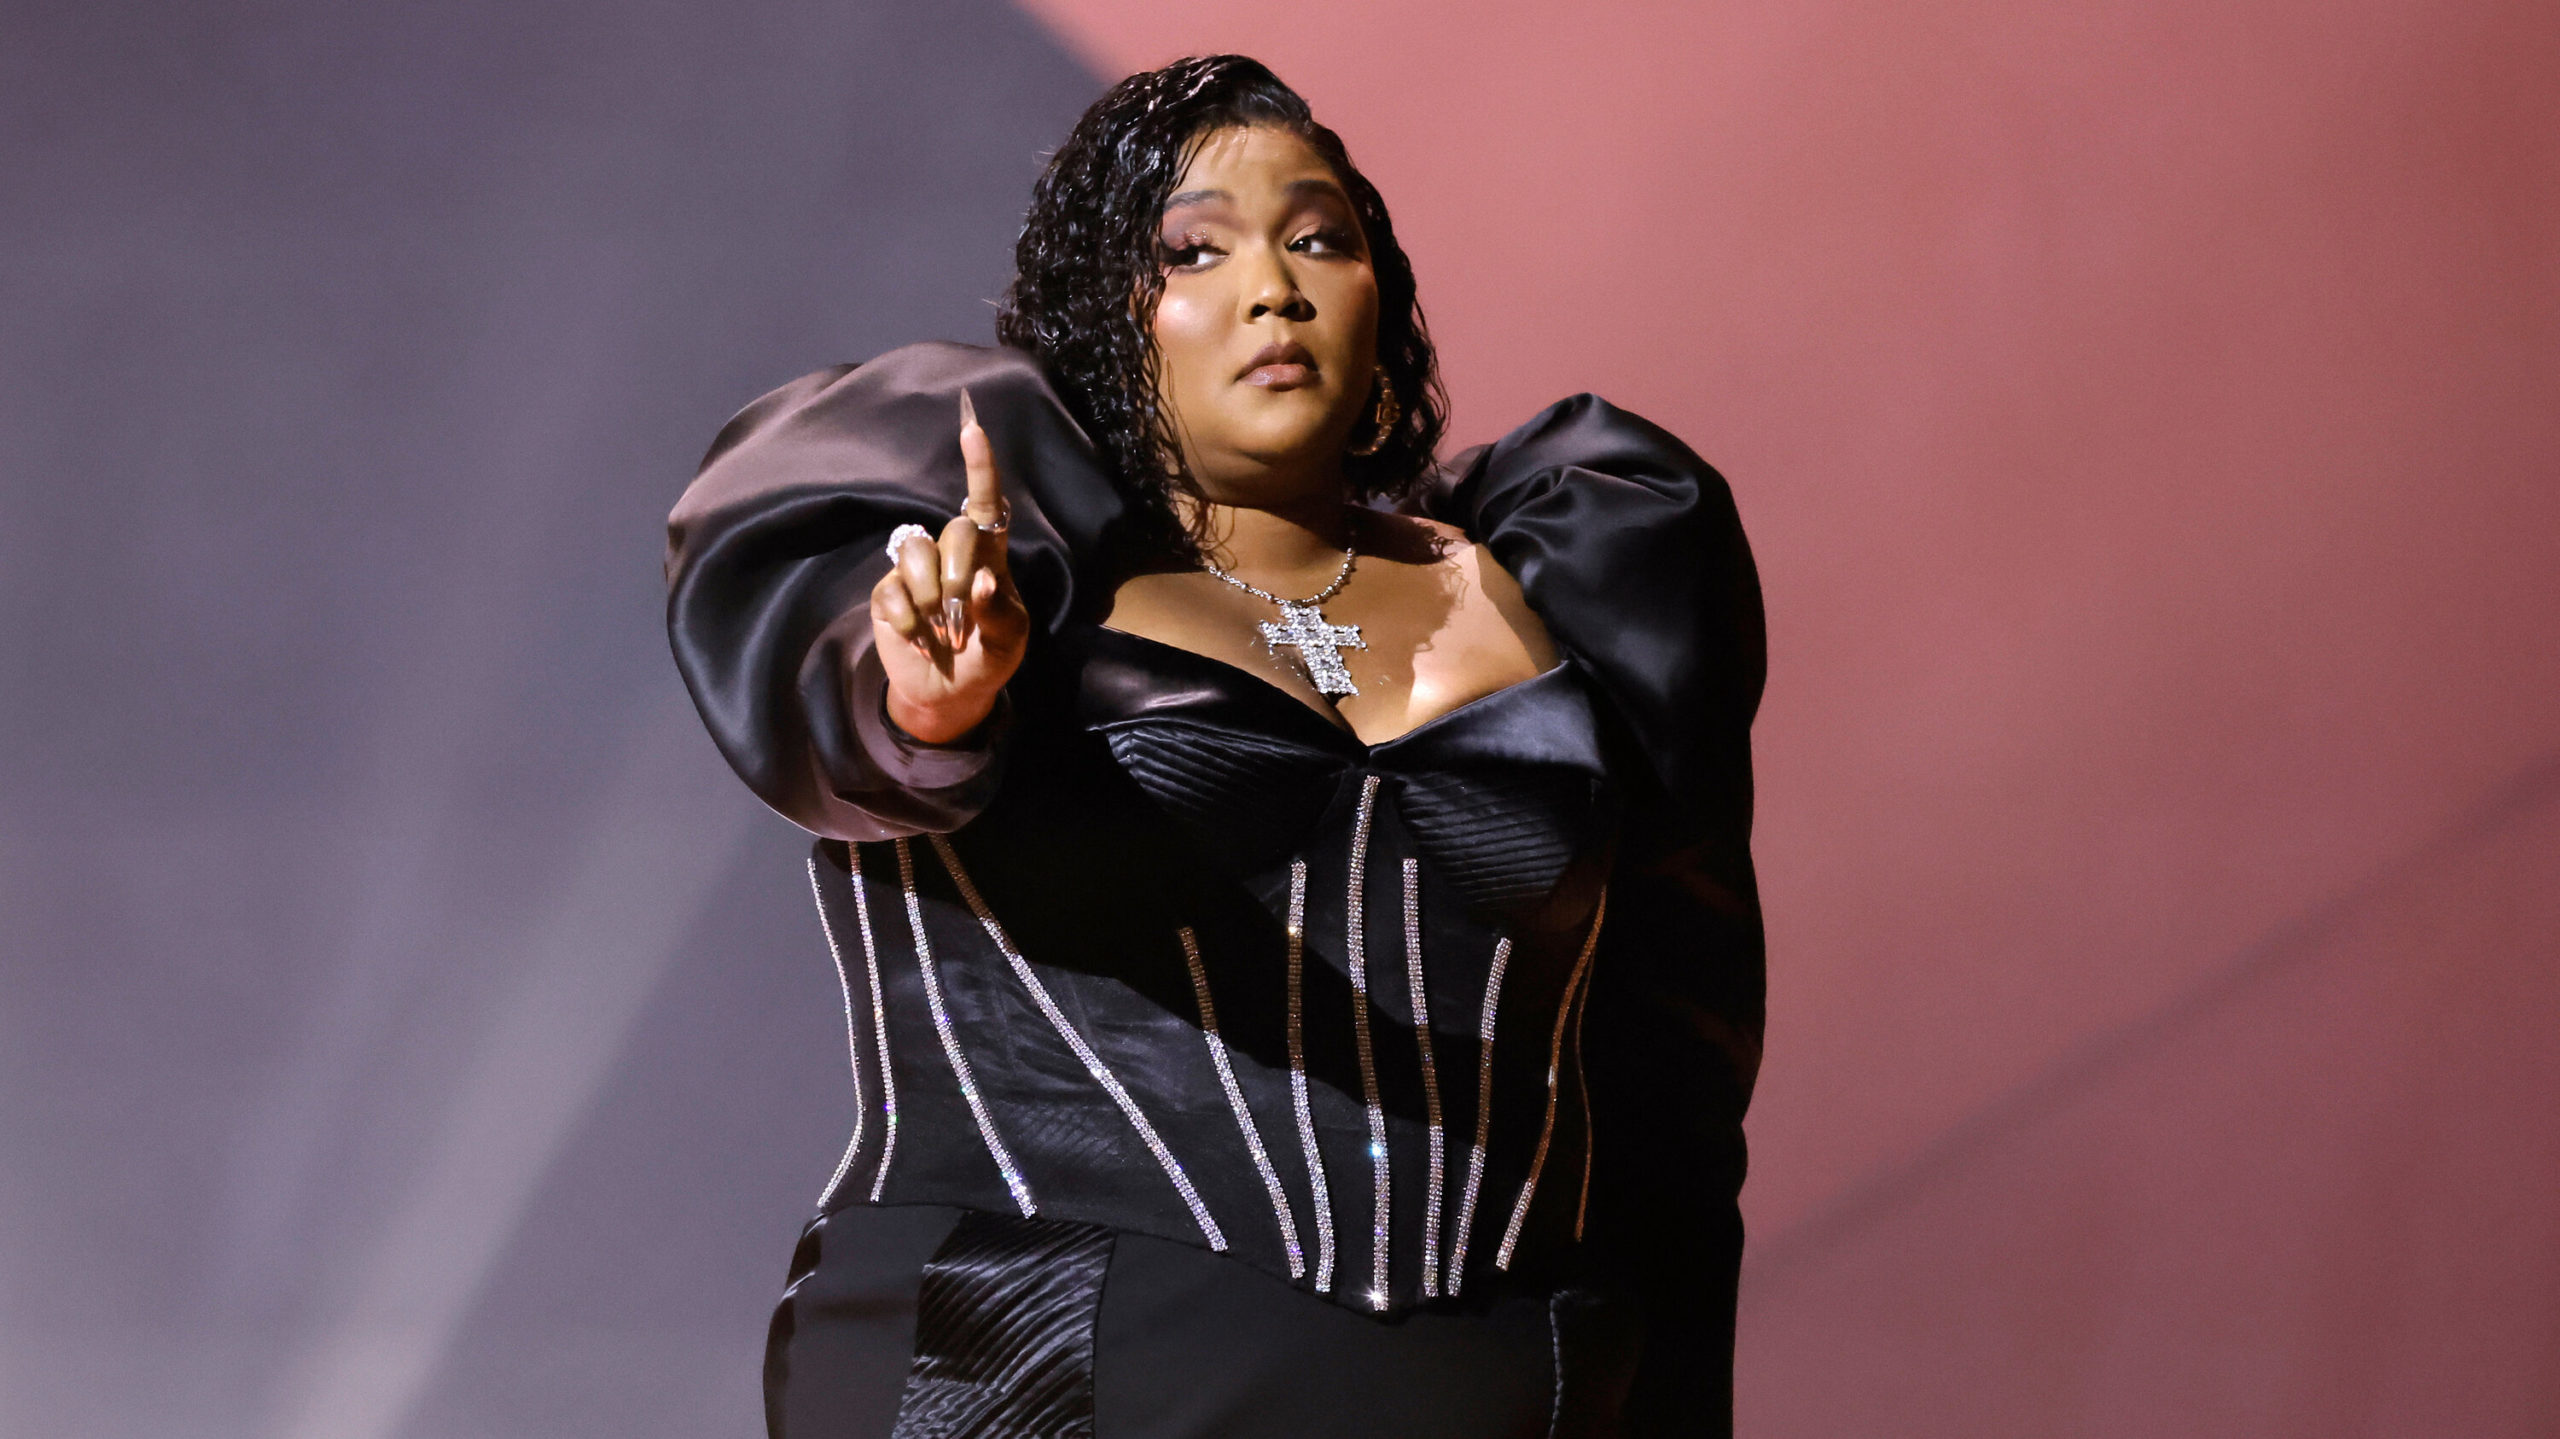 Lizzo Is So Irate With The ‘Daily’ Posts About Her Being ‘Fat’ That She’s Thought About ‘Quitting’: ‘Man, F*ck Y’all’